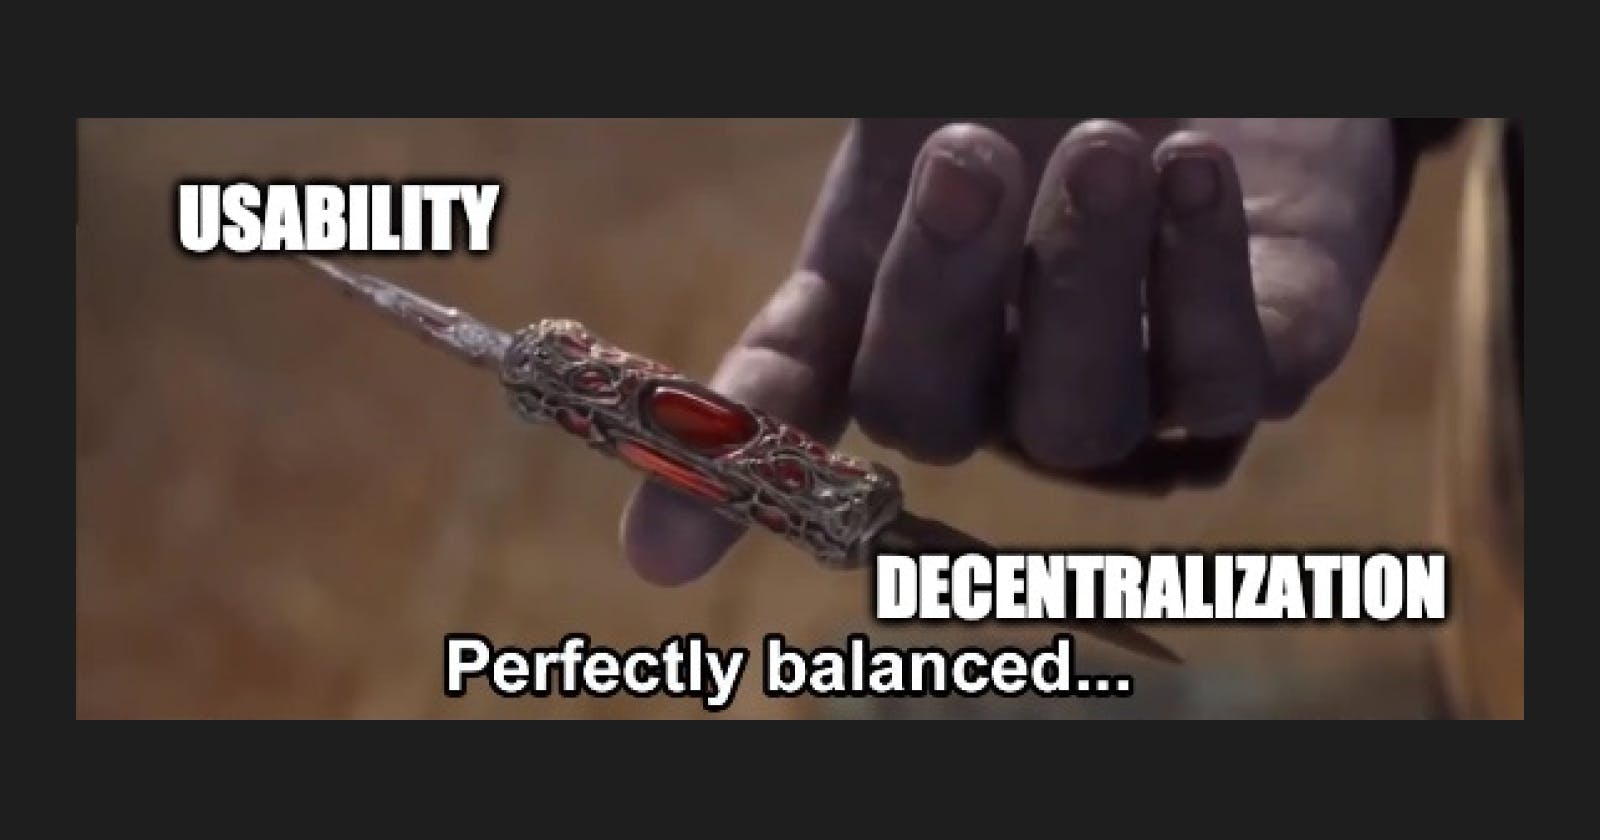 Decentralization vs Usability: Can We Find the Perfect Balance?